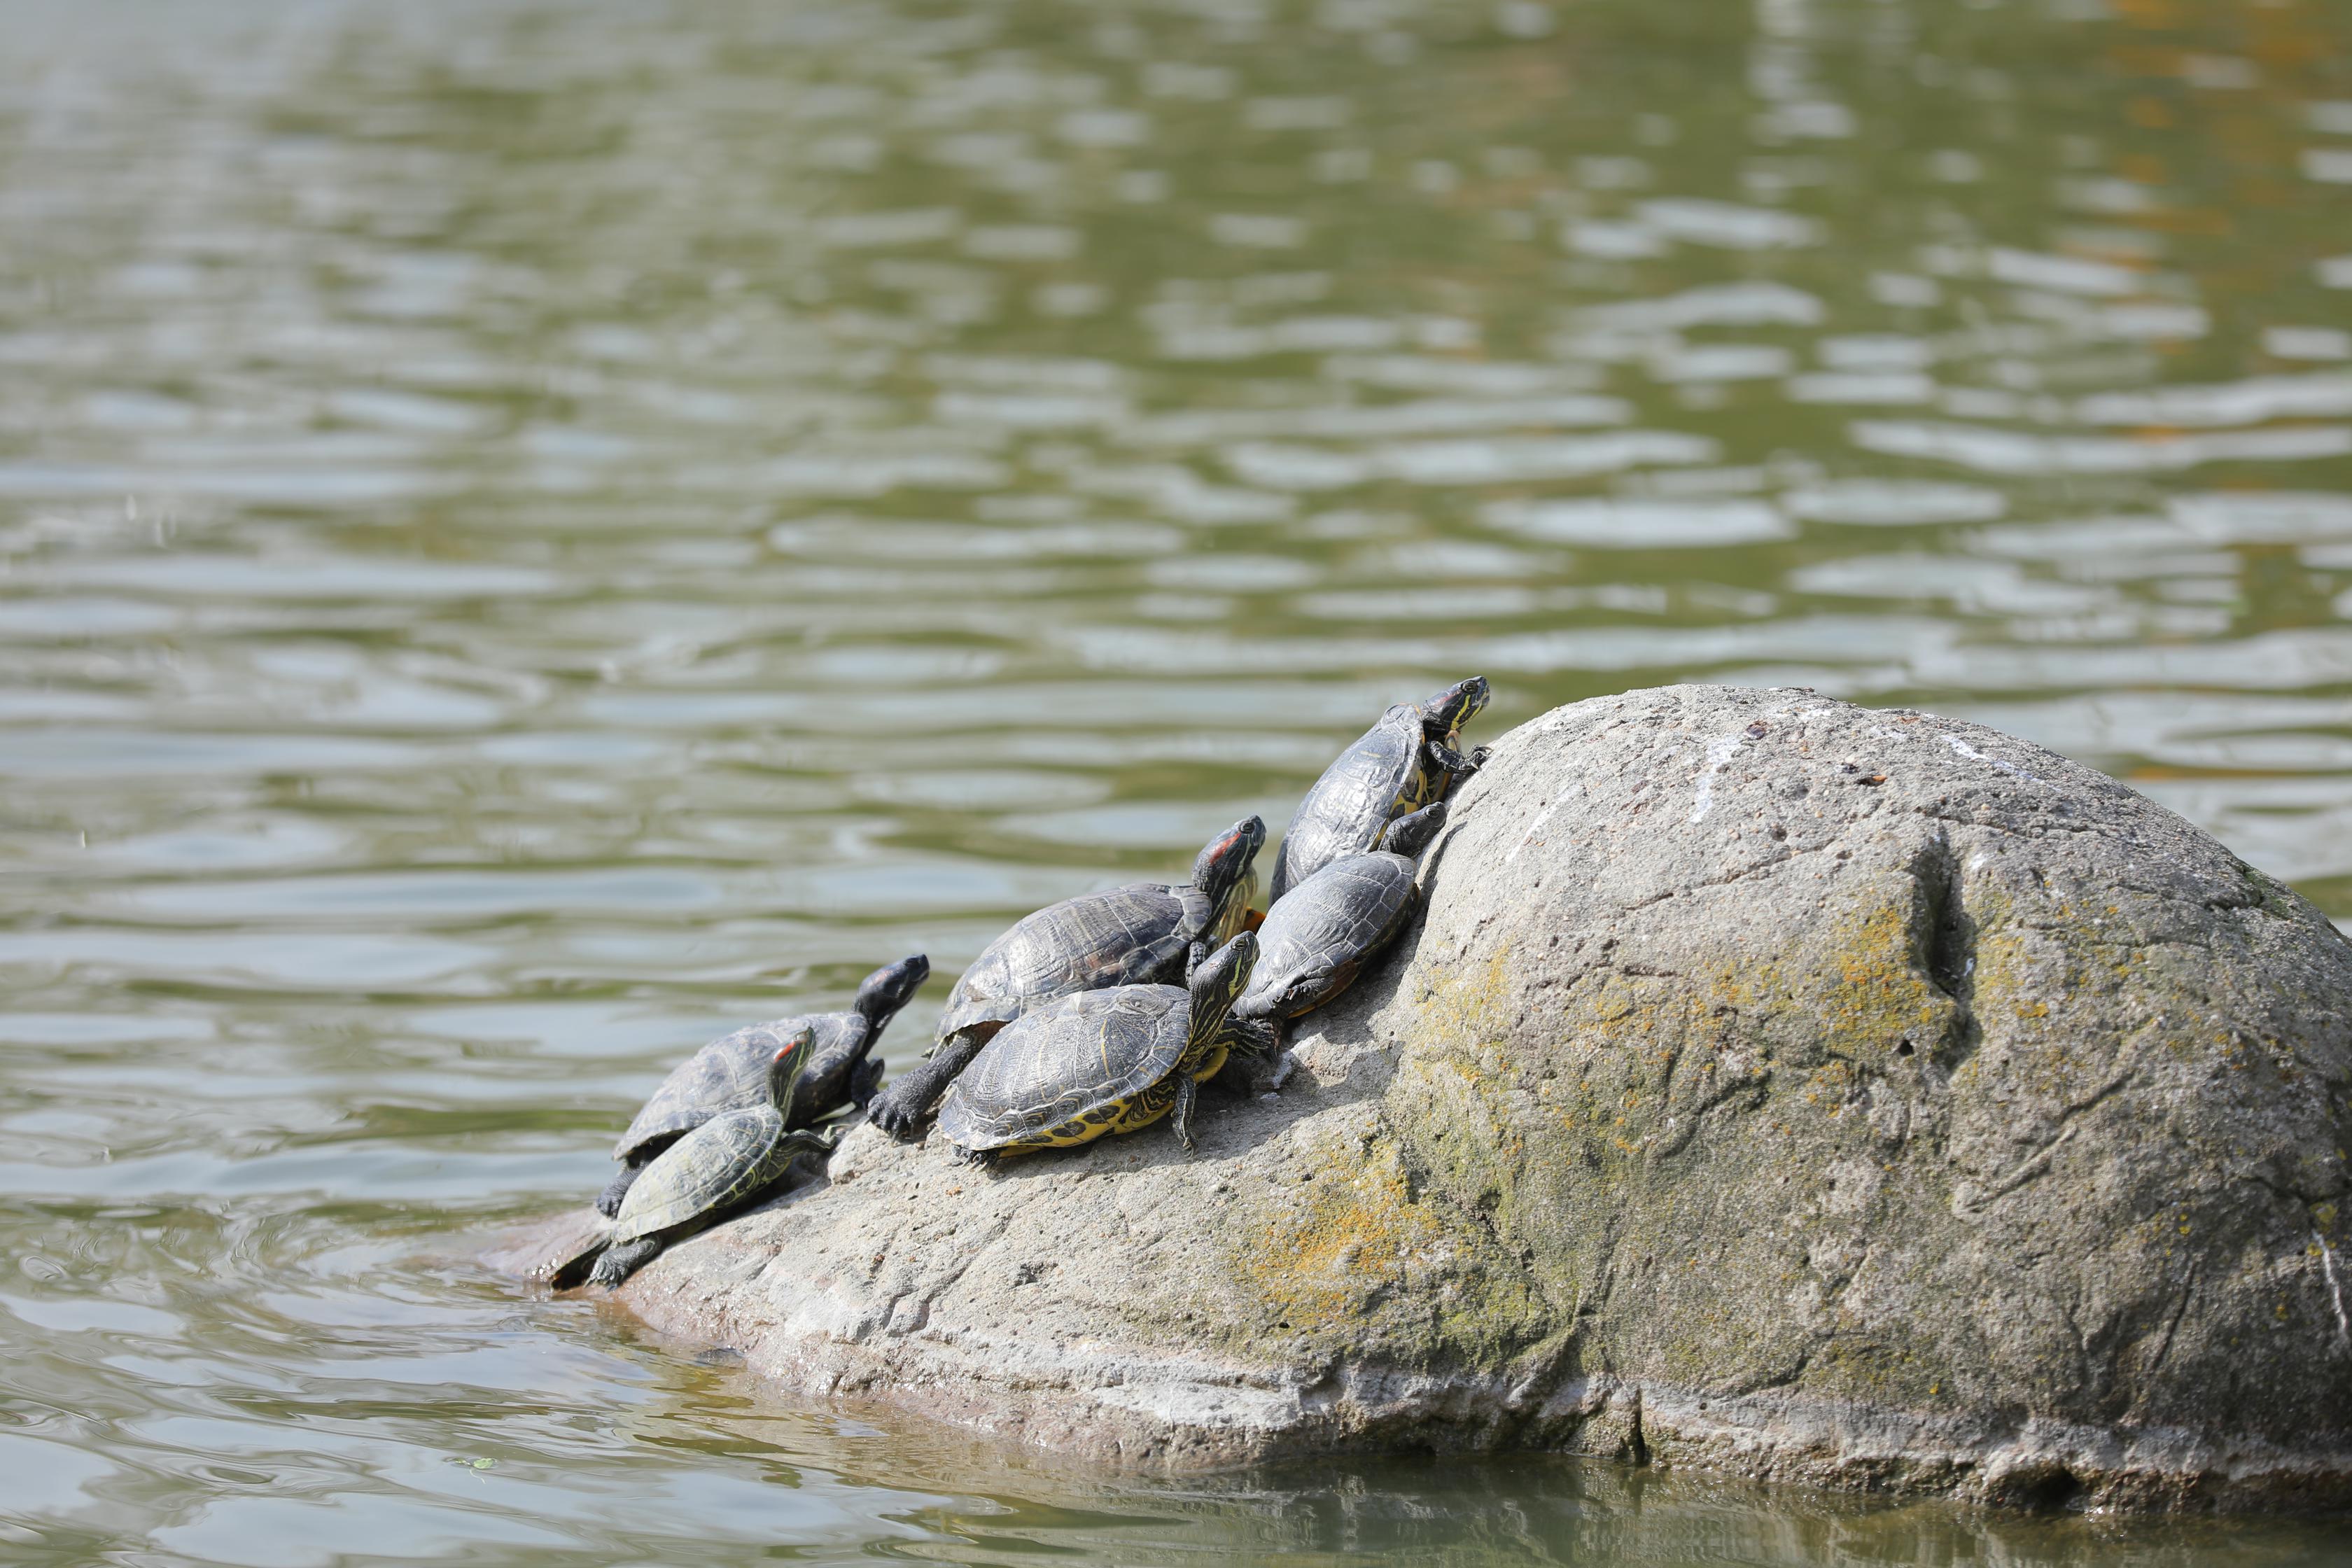 Types of turtles and their dietary habits